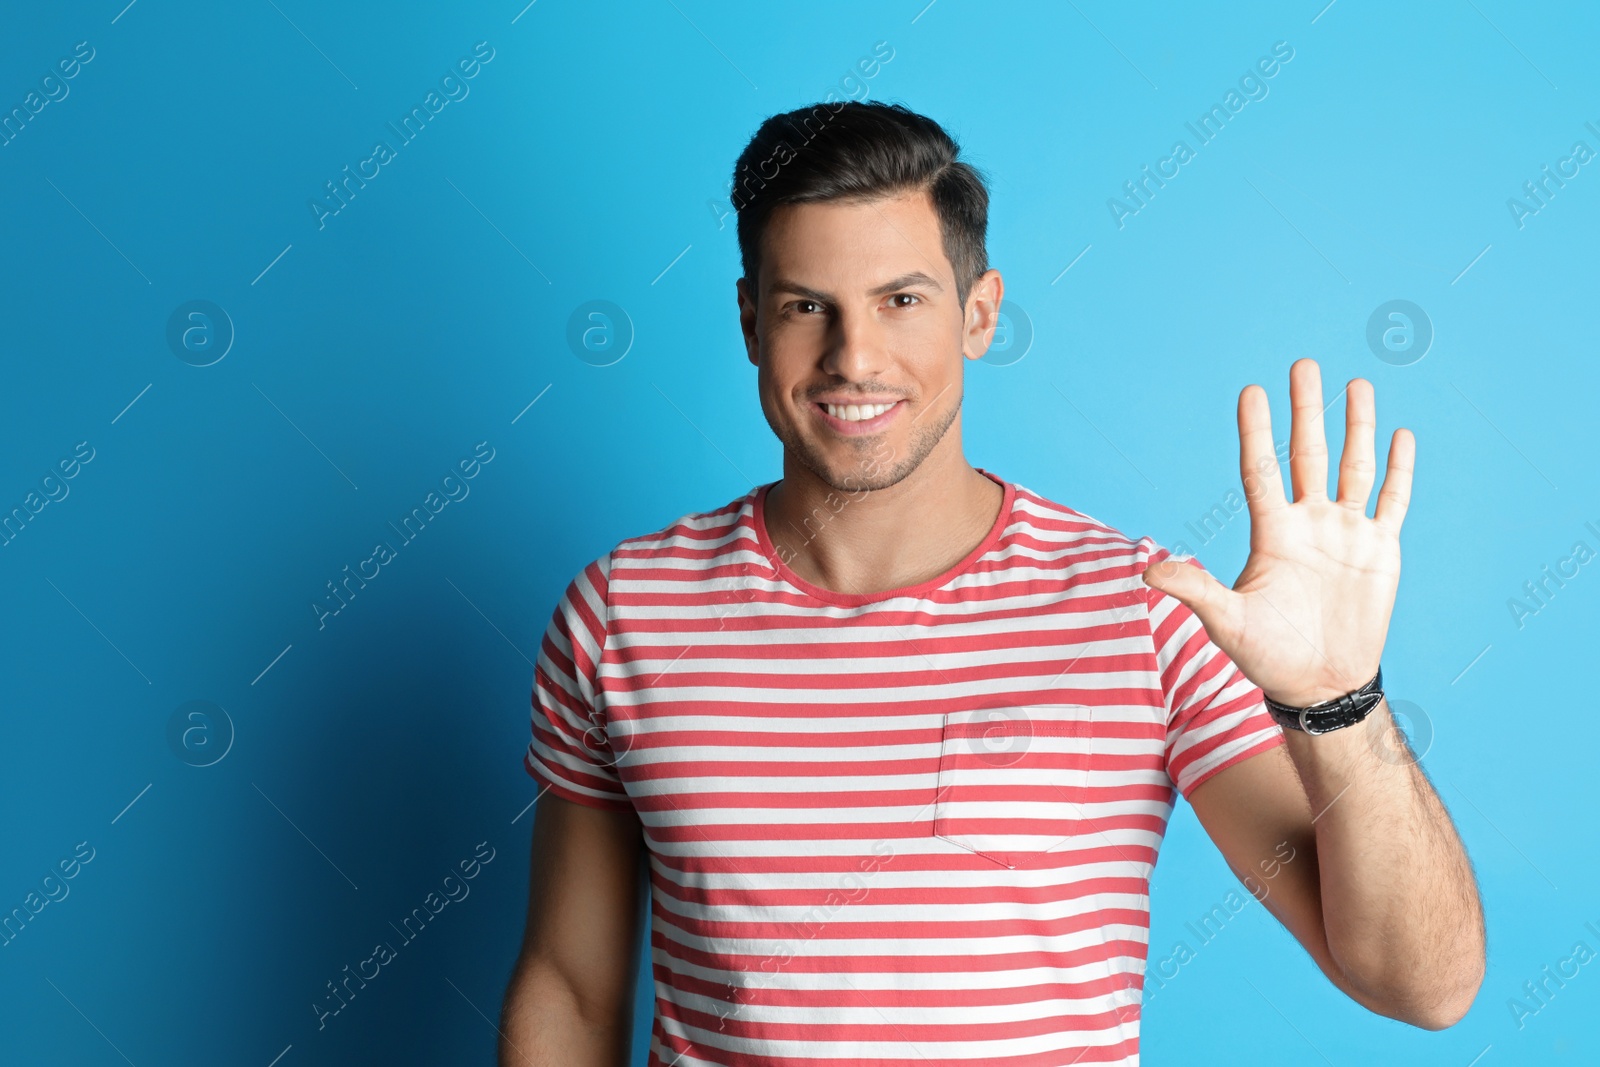 Photo of Man showing number five with his hand on light blue background